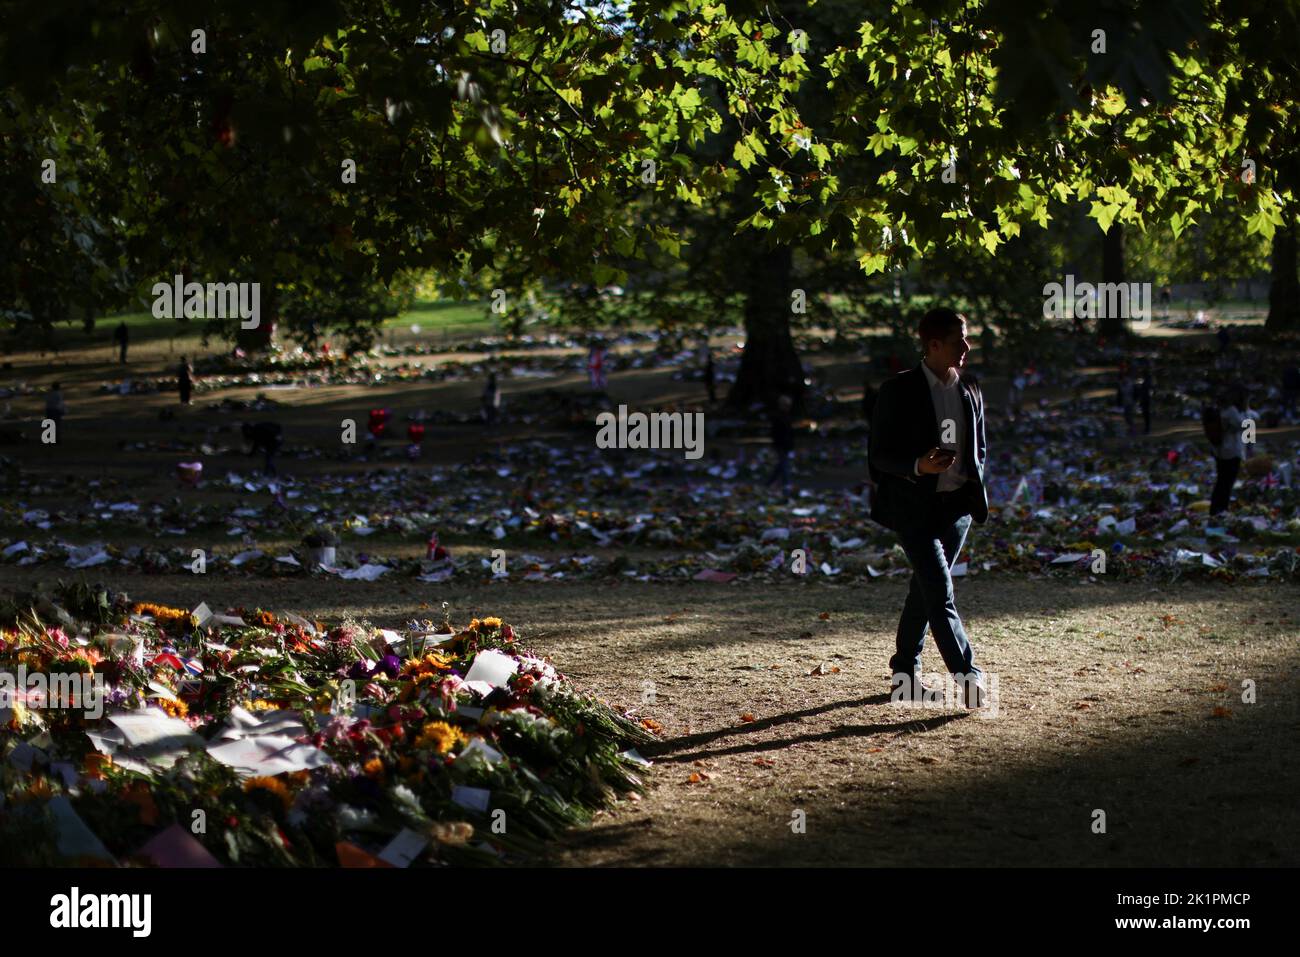 A man walks by as volunteers removes packaging from floral tributes, following the funeral of Britain's Queen Elizabeth, in Green Park in London, Britain September 20, 2022. REUTERS/Tom Nicholson Stock Photo